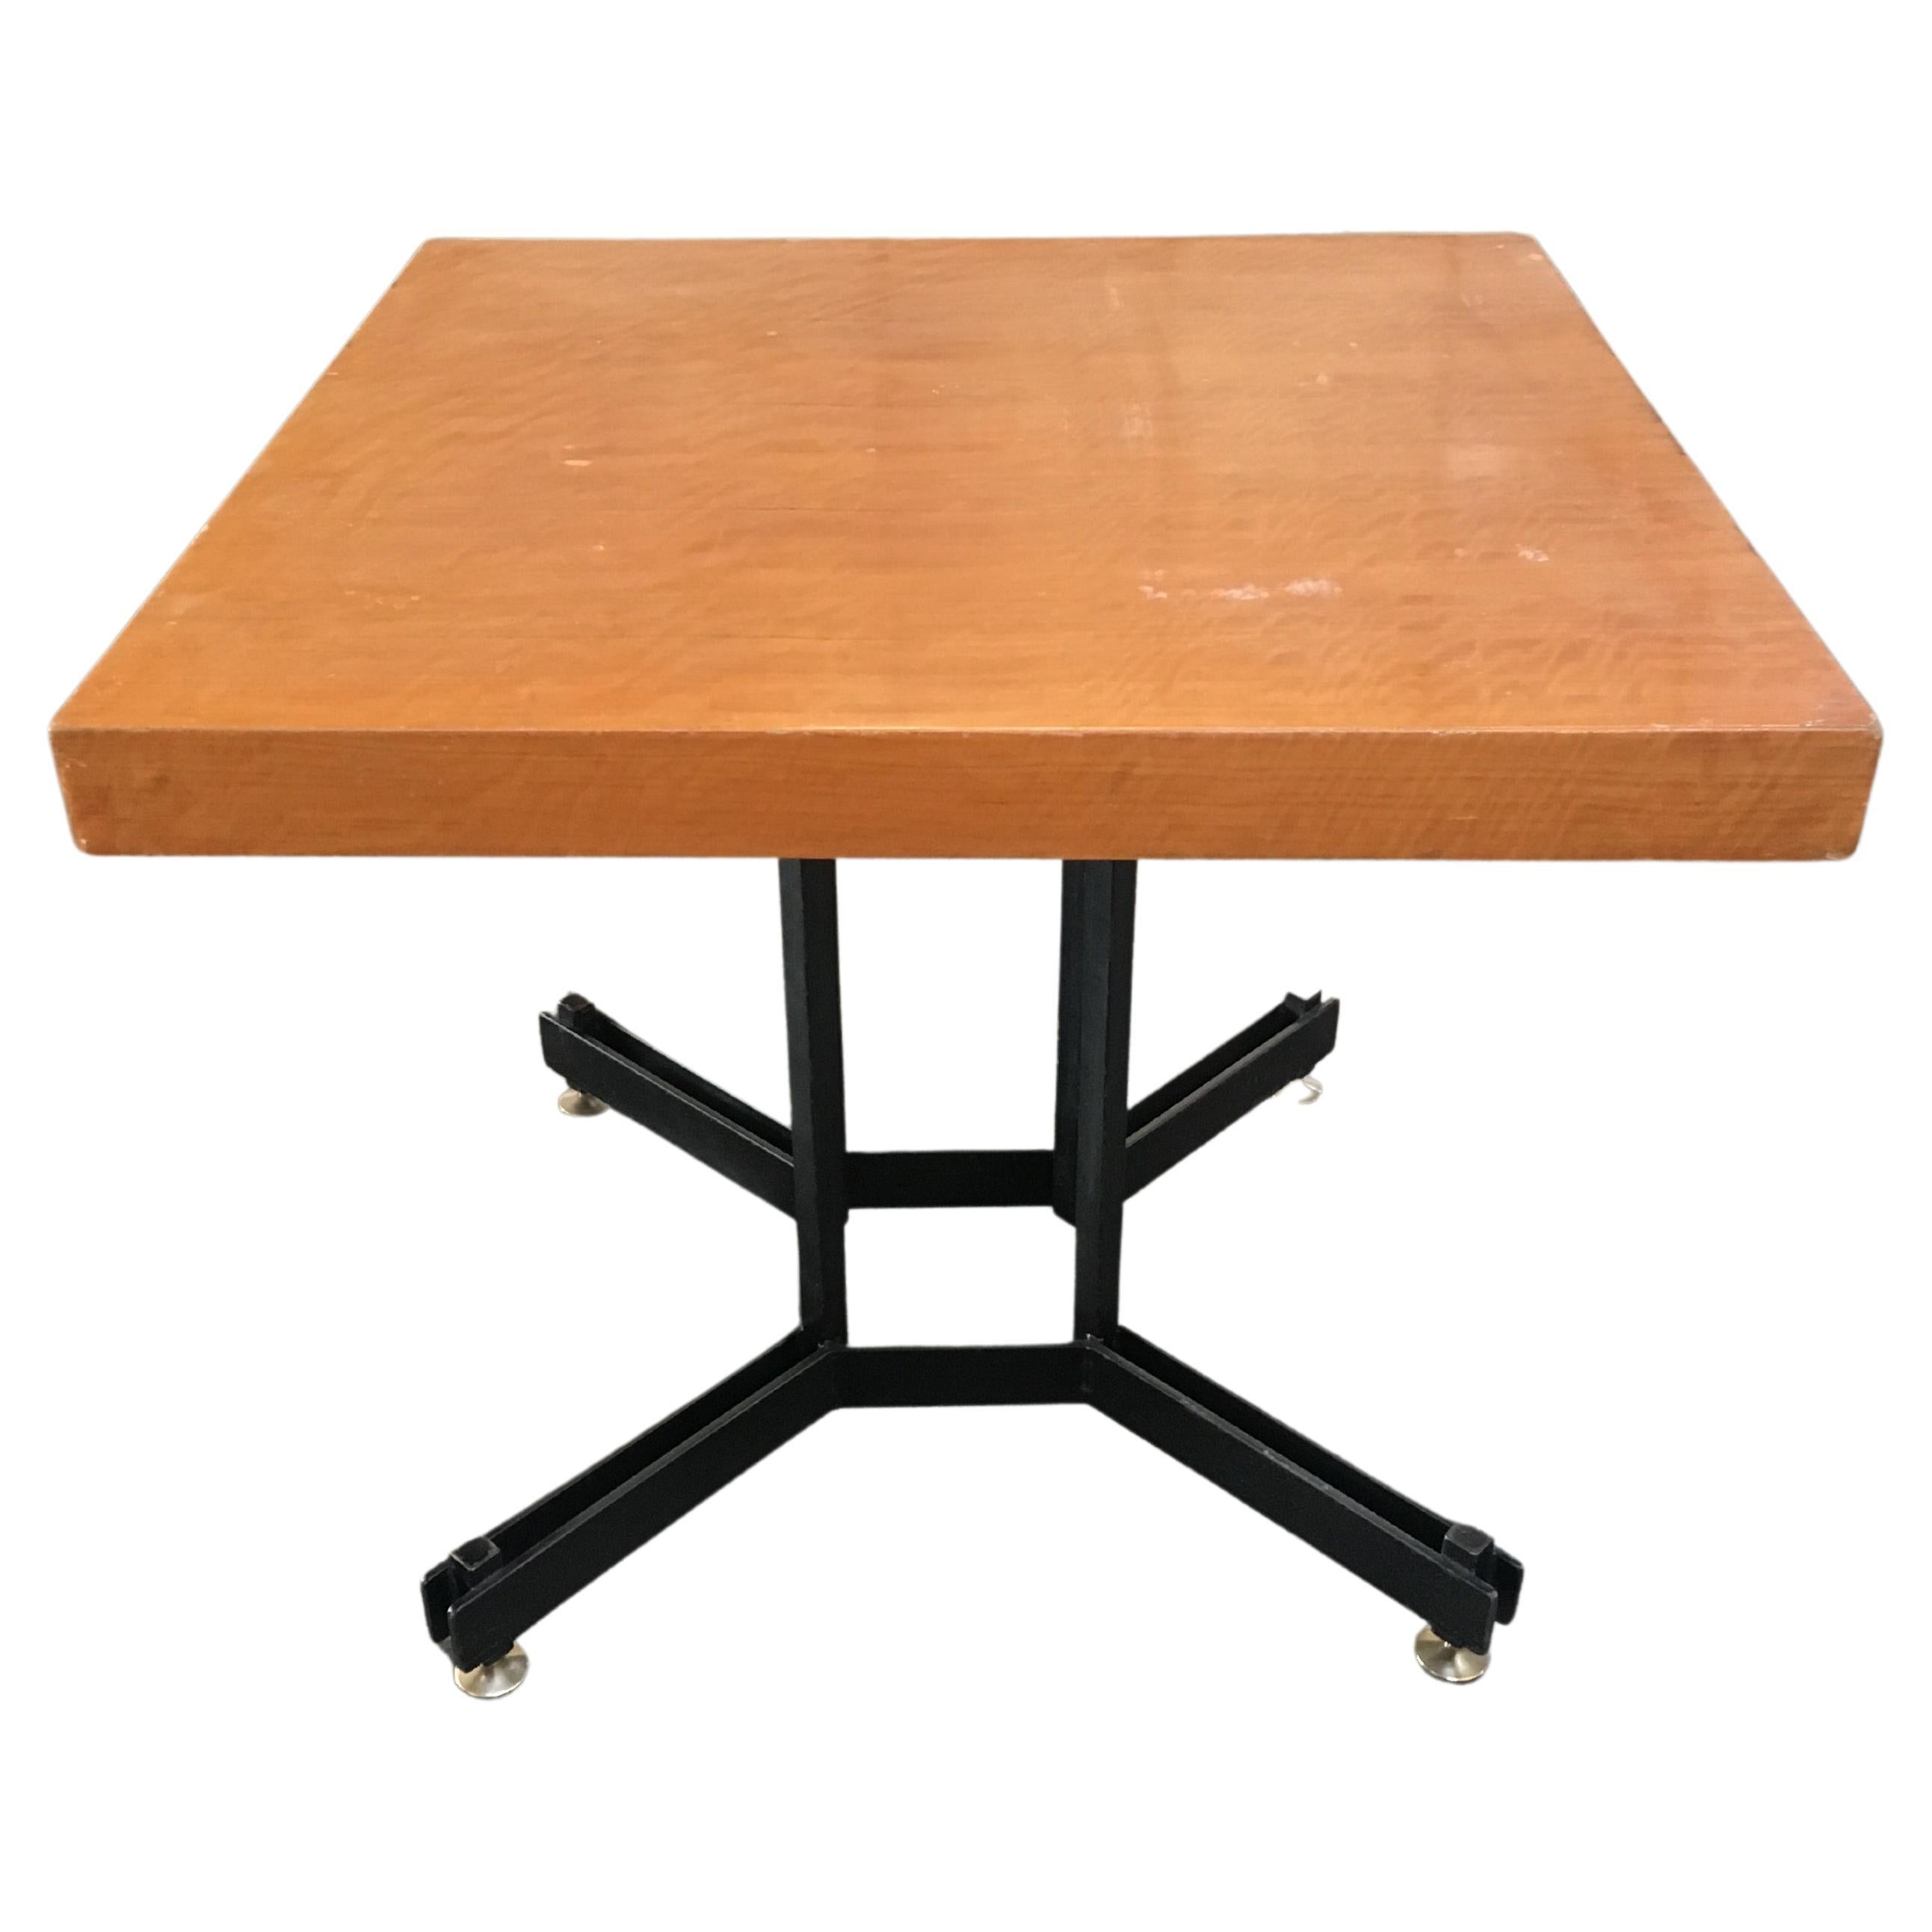 Mid-Century Modern Italian Black Iron Base Table with Wood Top, 1970s For Sale